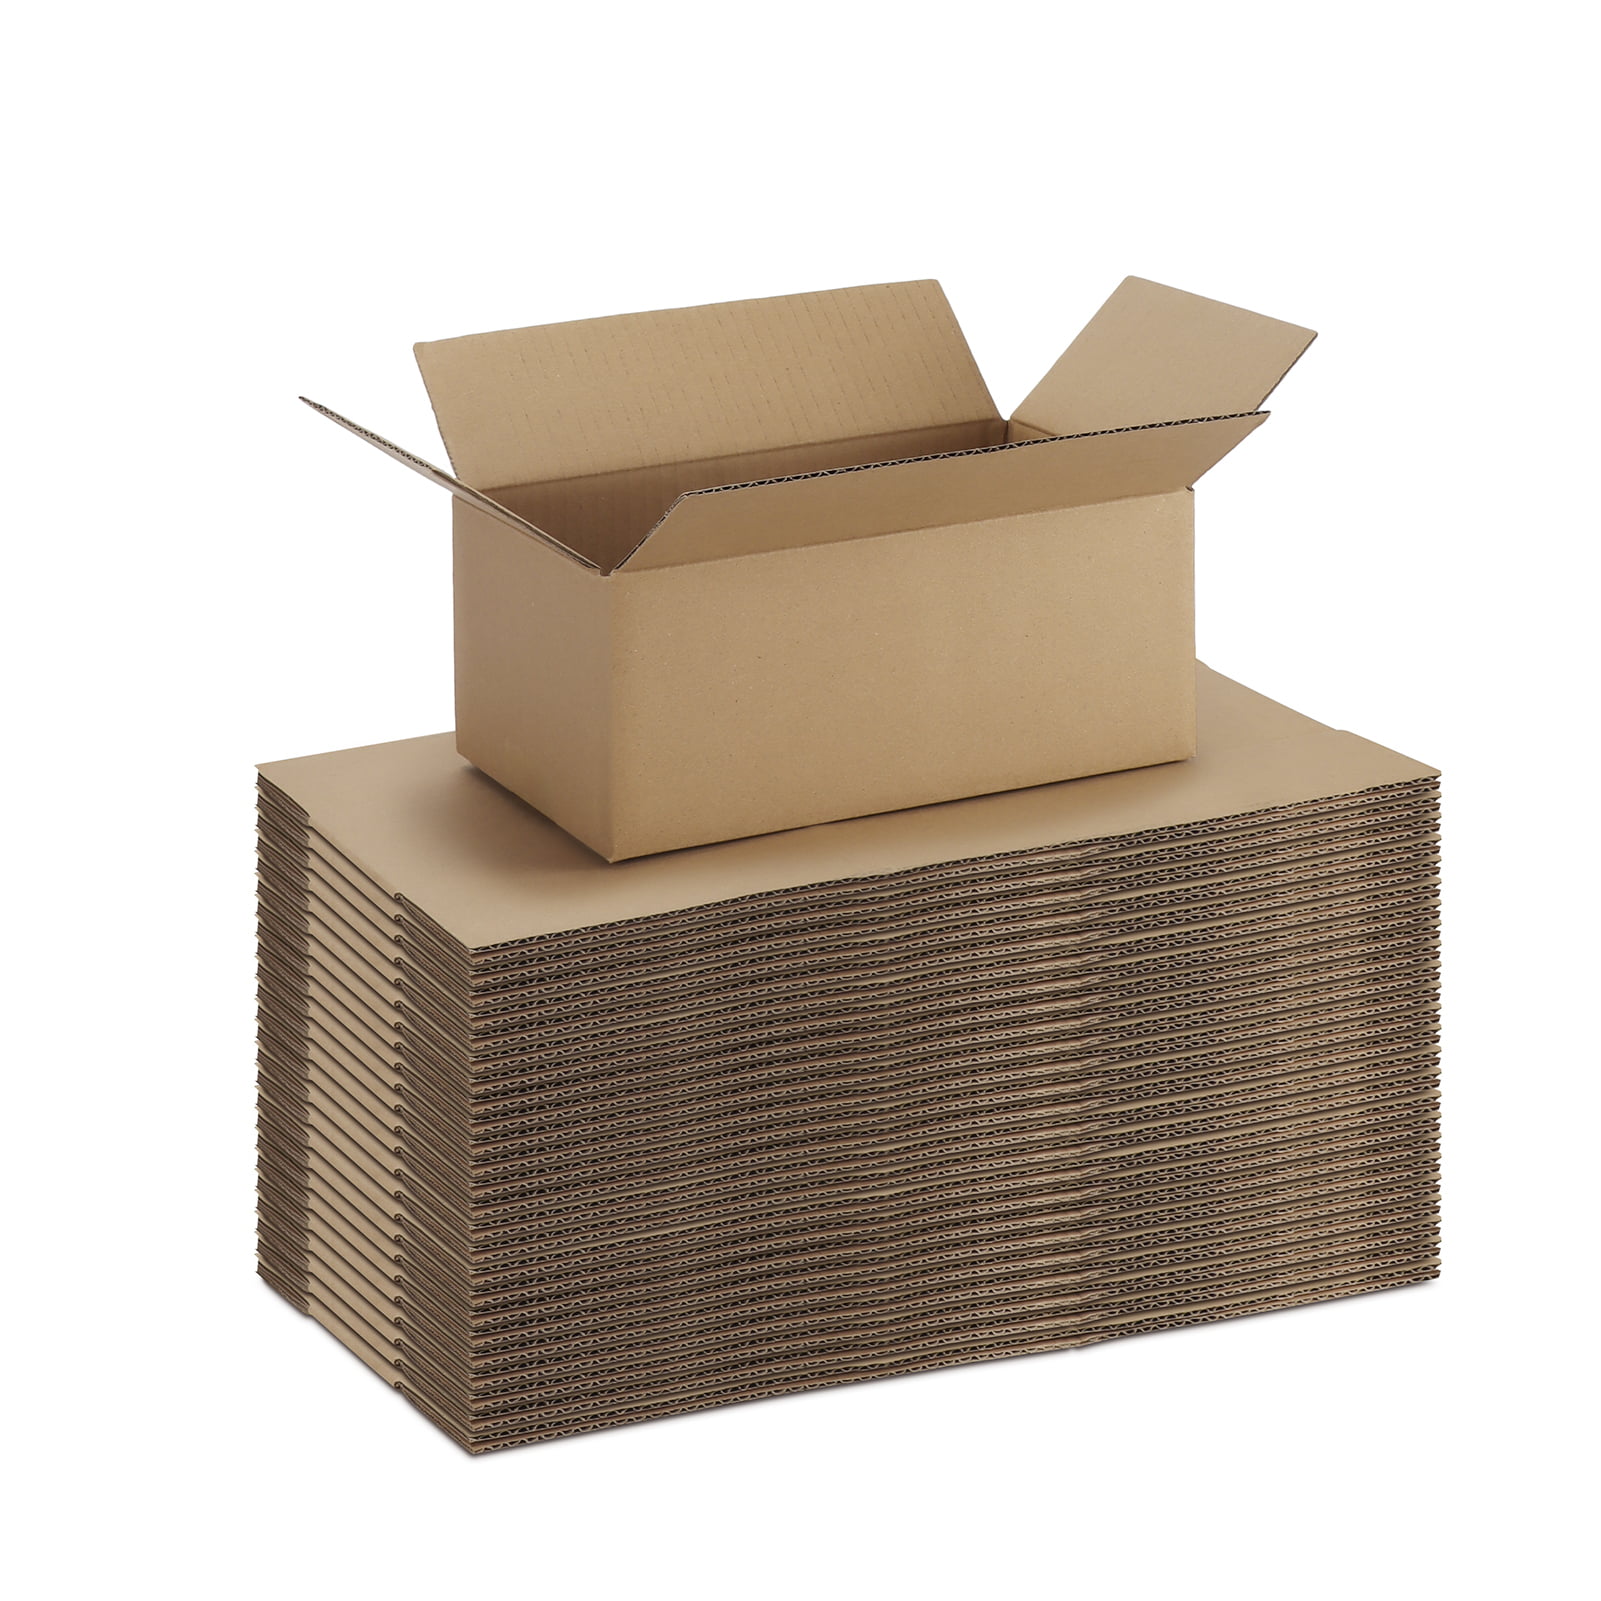 Aviditi 974 Corrugated Cardboard Box 9 L x 7 W x 4 H Kraft Pack of 25 for Shipping Packing and Moving 